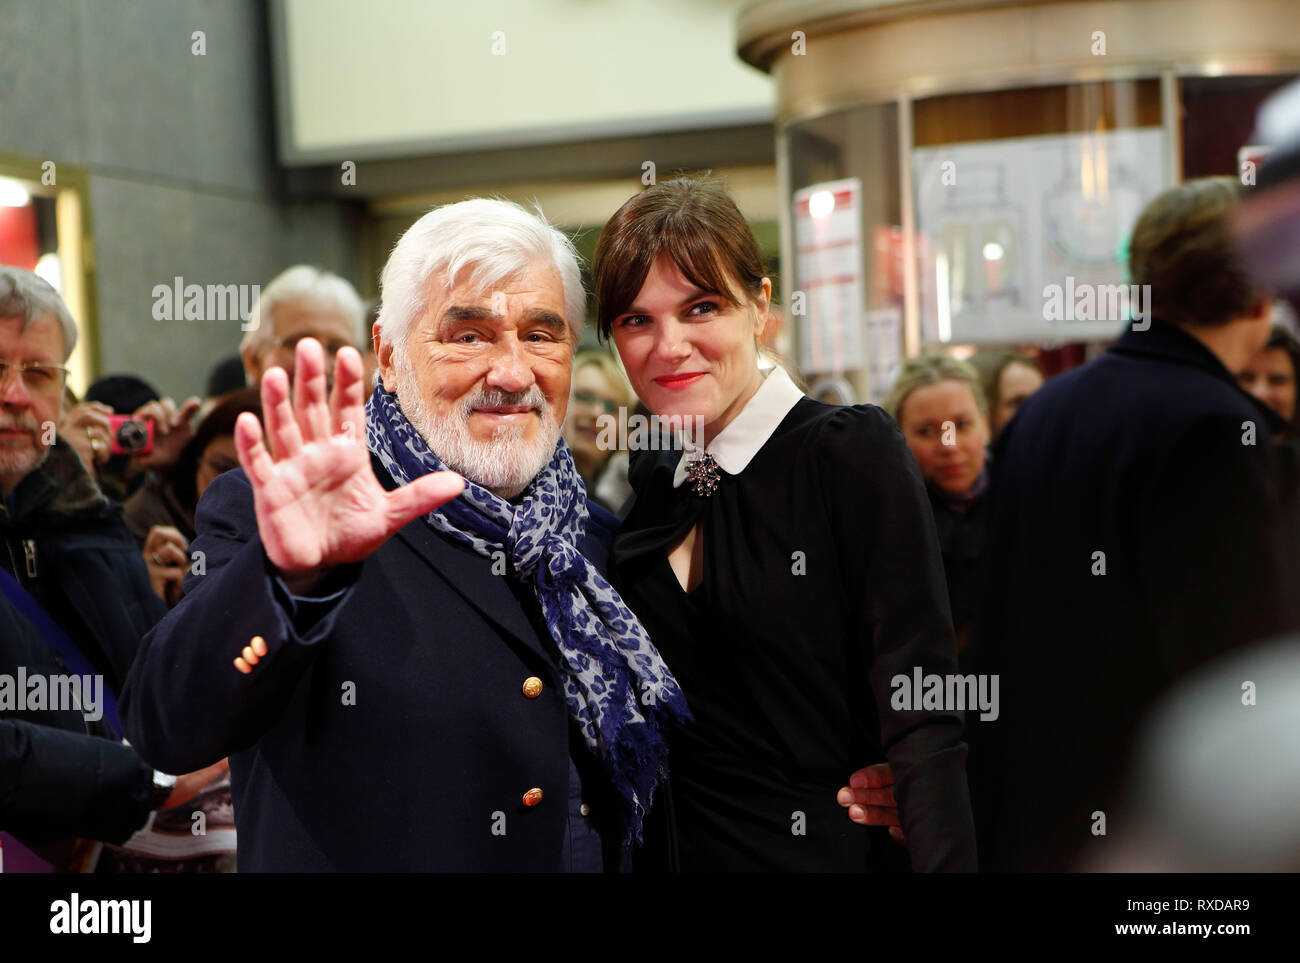 Germany, Essen, 04.12.2012: The actor Mario Adorf and the actress Fritzi Haberlandt before the premiere of the movie DIE LIBELLE, Deutschland, Essen, Stock Photo